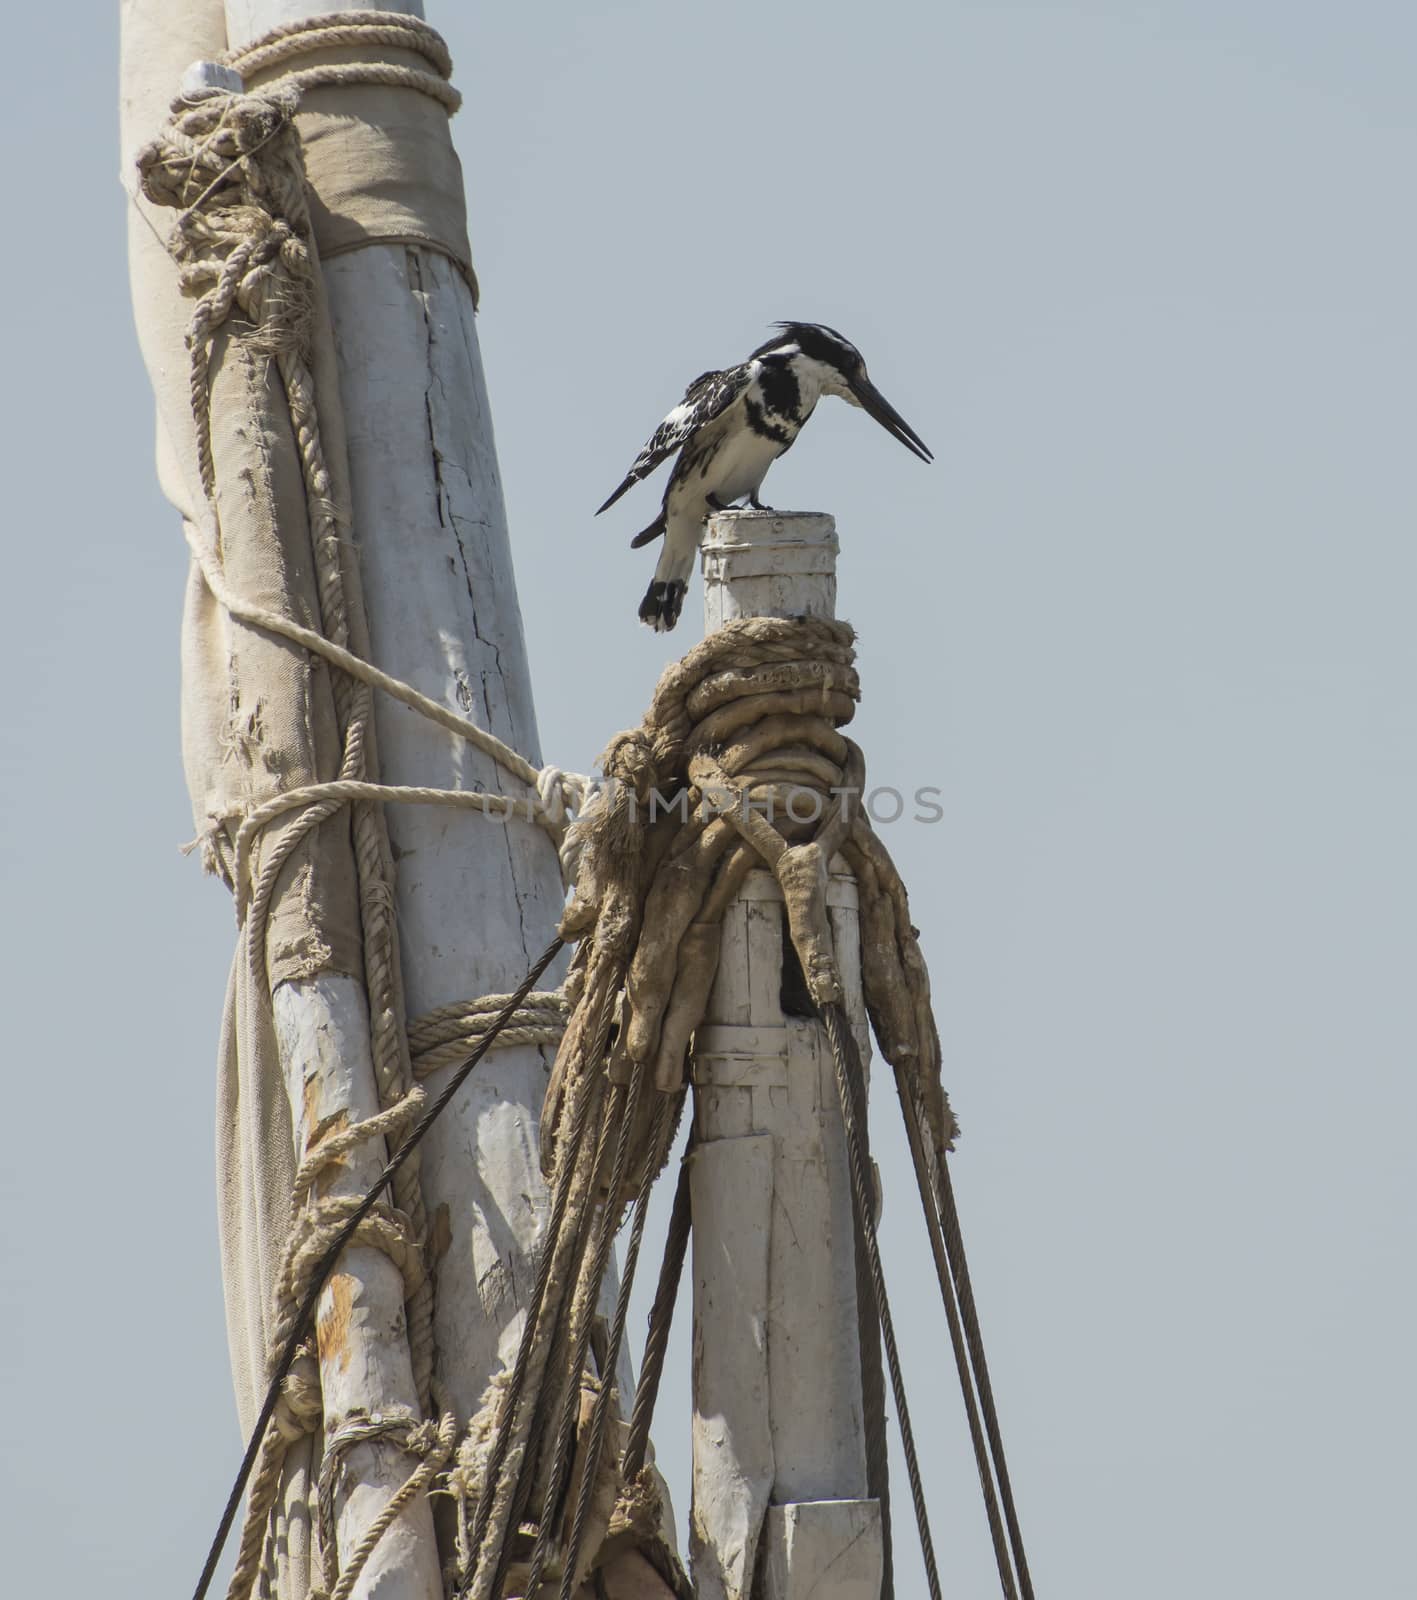 Pied kingfisher Ceryle rudis perched on the top of a wooden boat mast